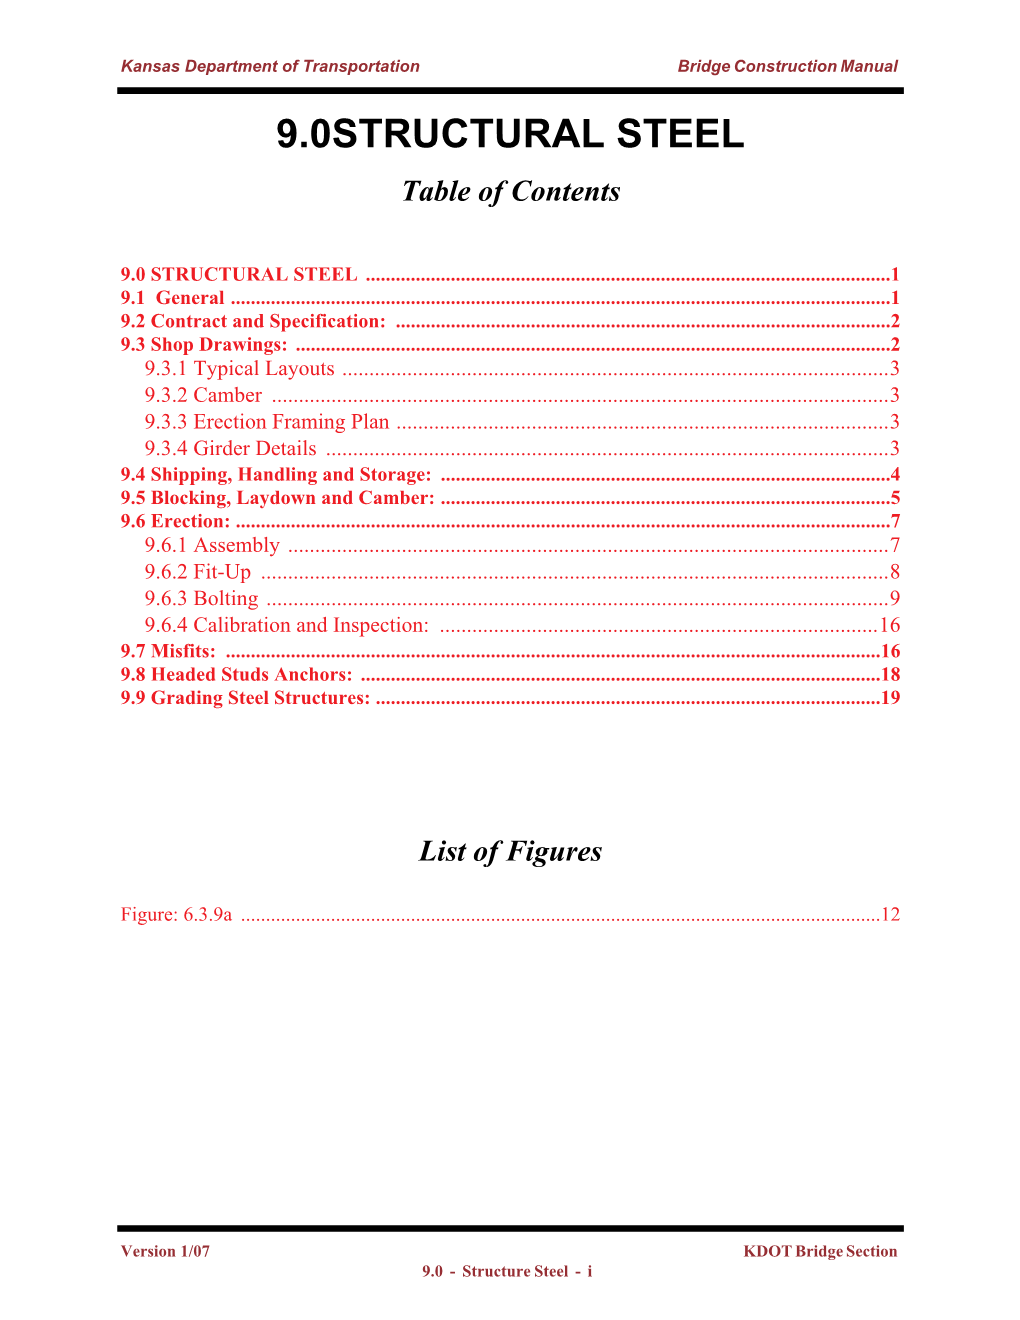 9.0STRUCTURAL STEEL Table of Contents